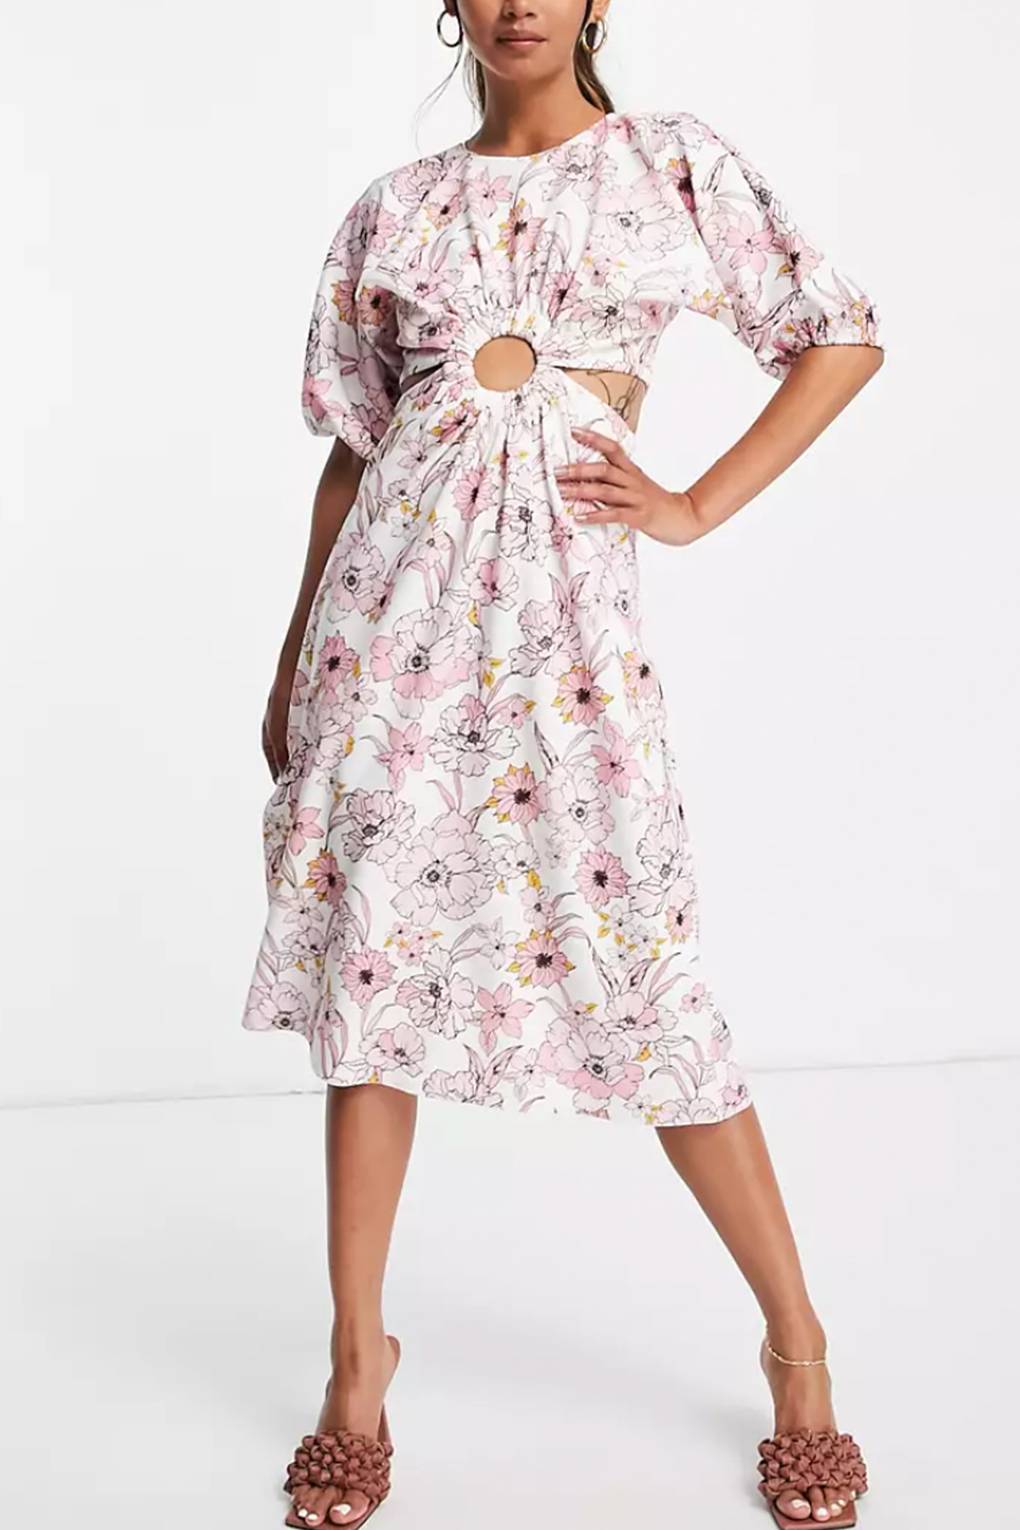 17 Best Cut-Out Dresses for Summer 2021 | Glamour UK